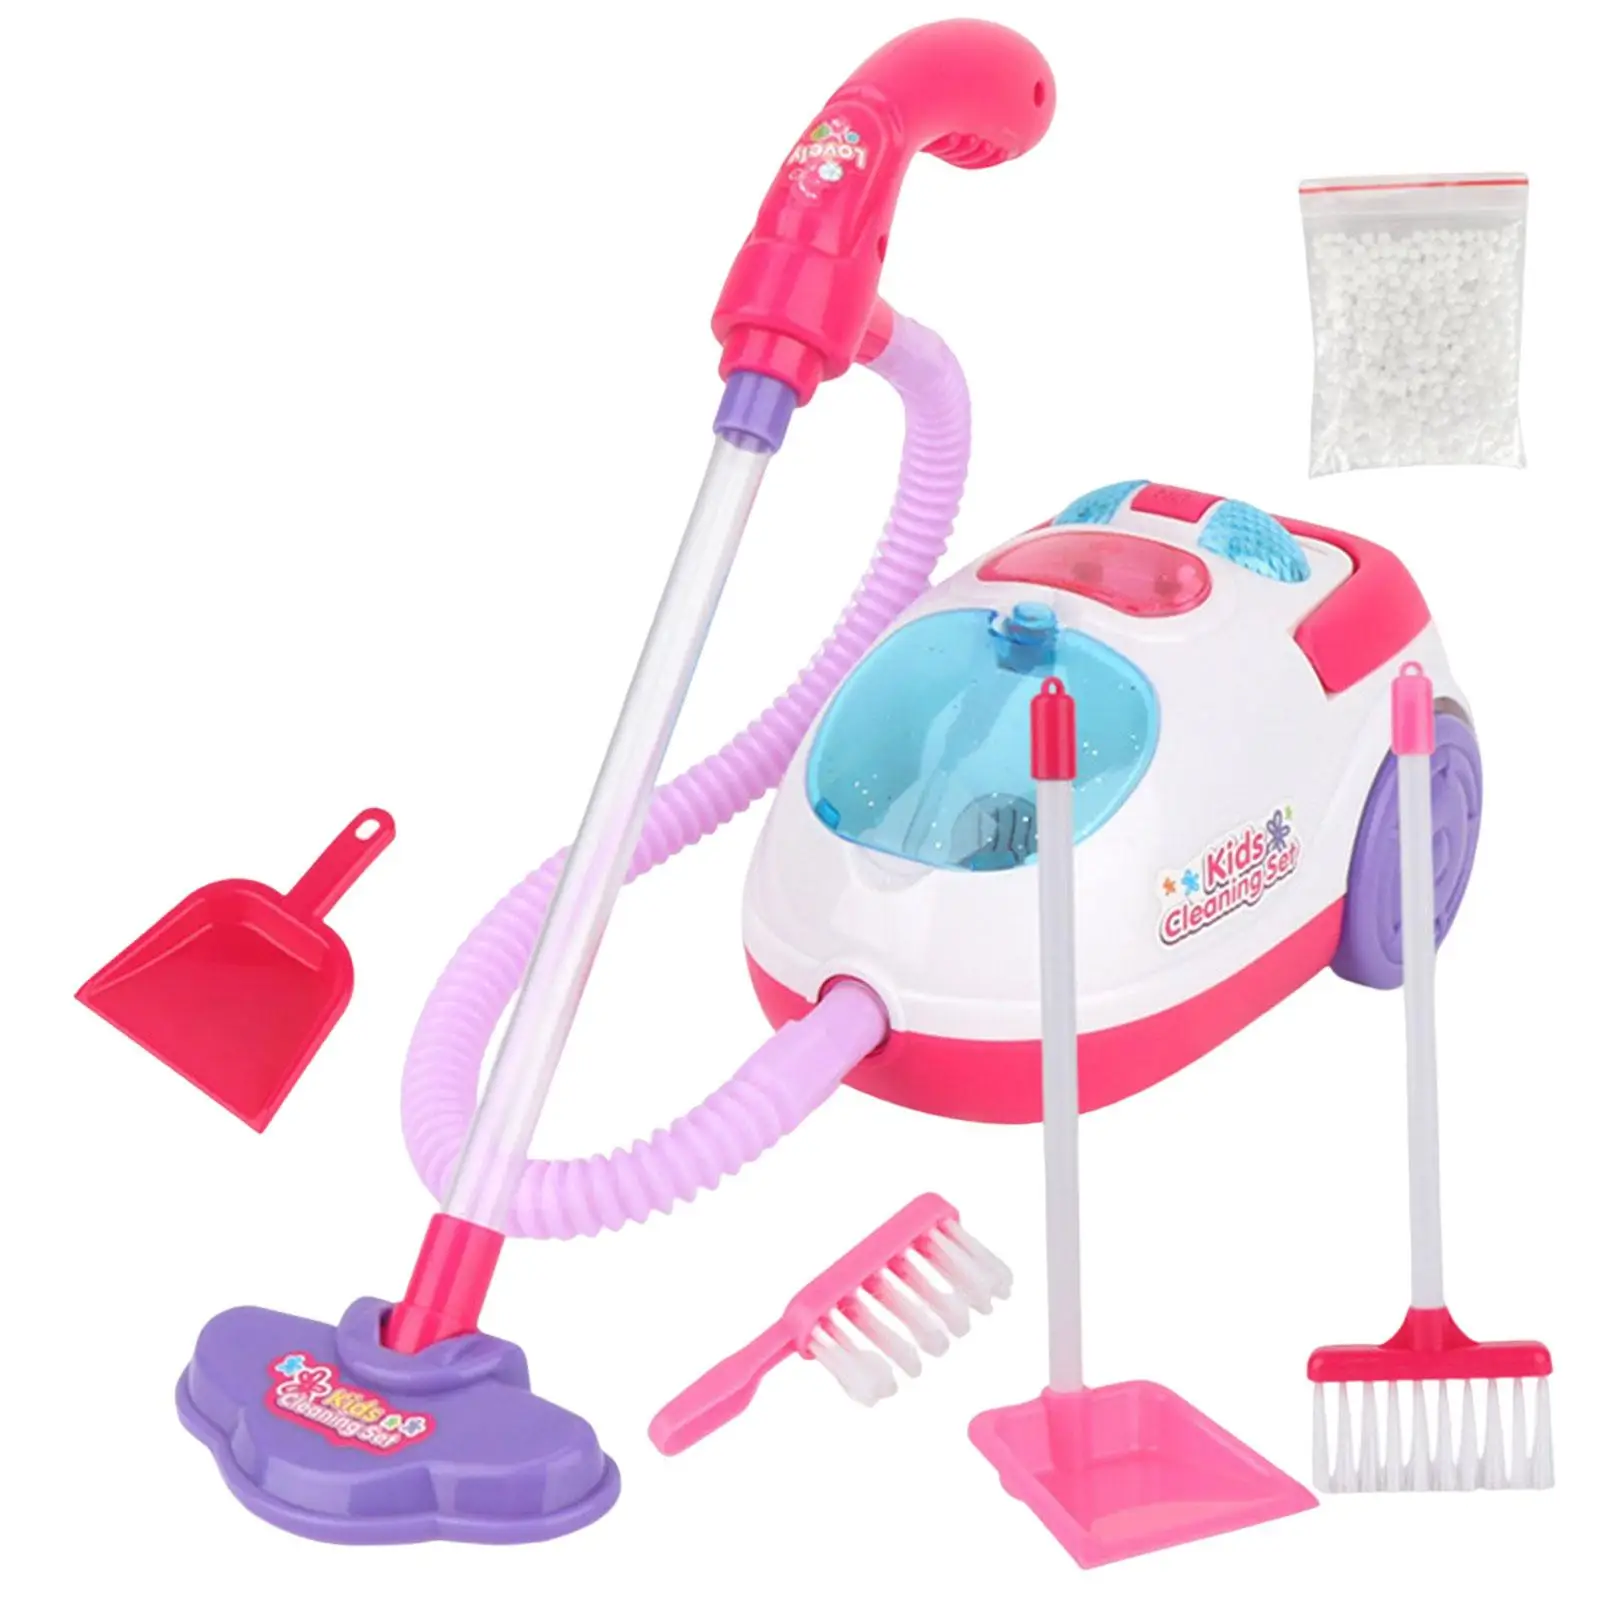 Pink Mini Vacuum Cleaner Cleaning Set,Housekeeping Parent Child Game,Playing Learning Toys ,Role Play for Ages 3 4 5 6 Toddlers